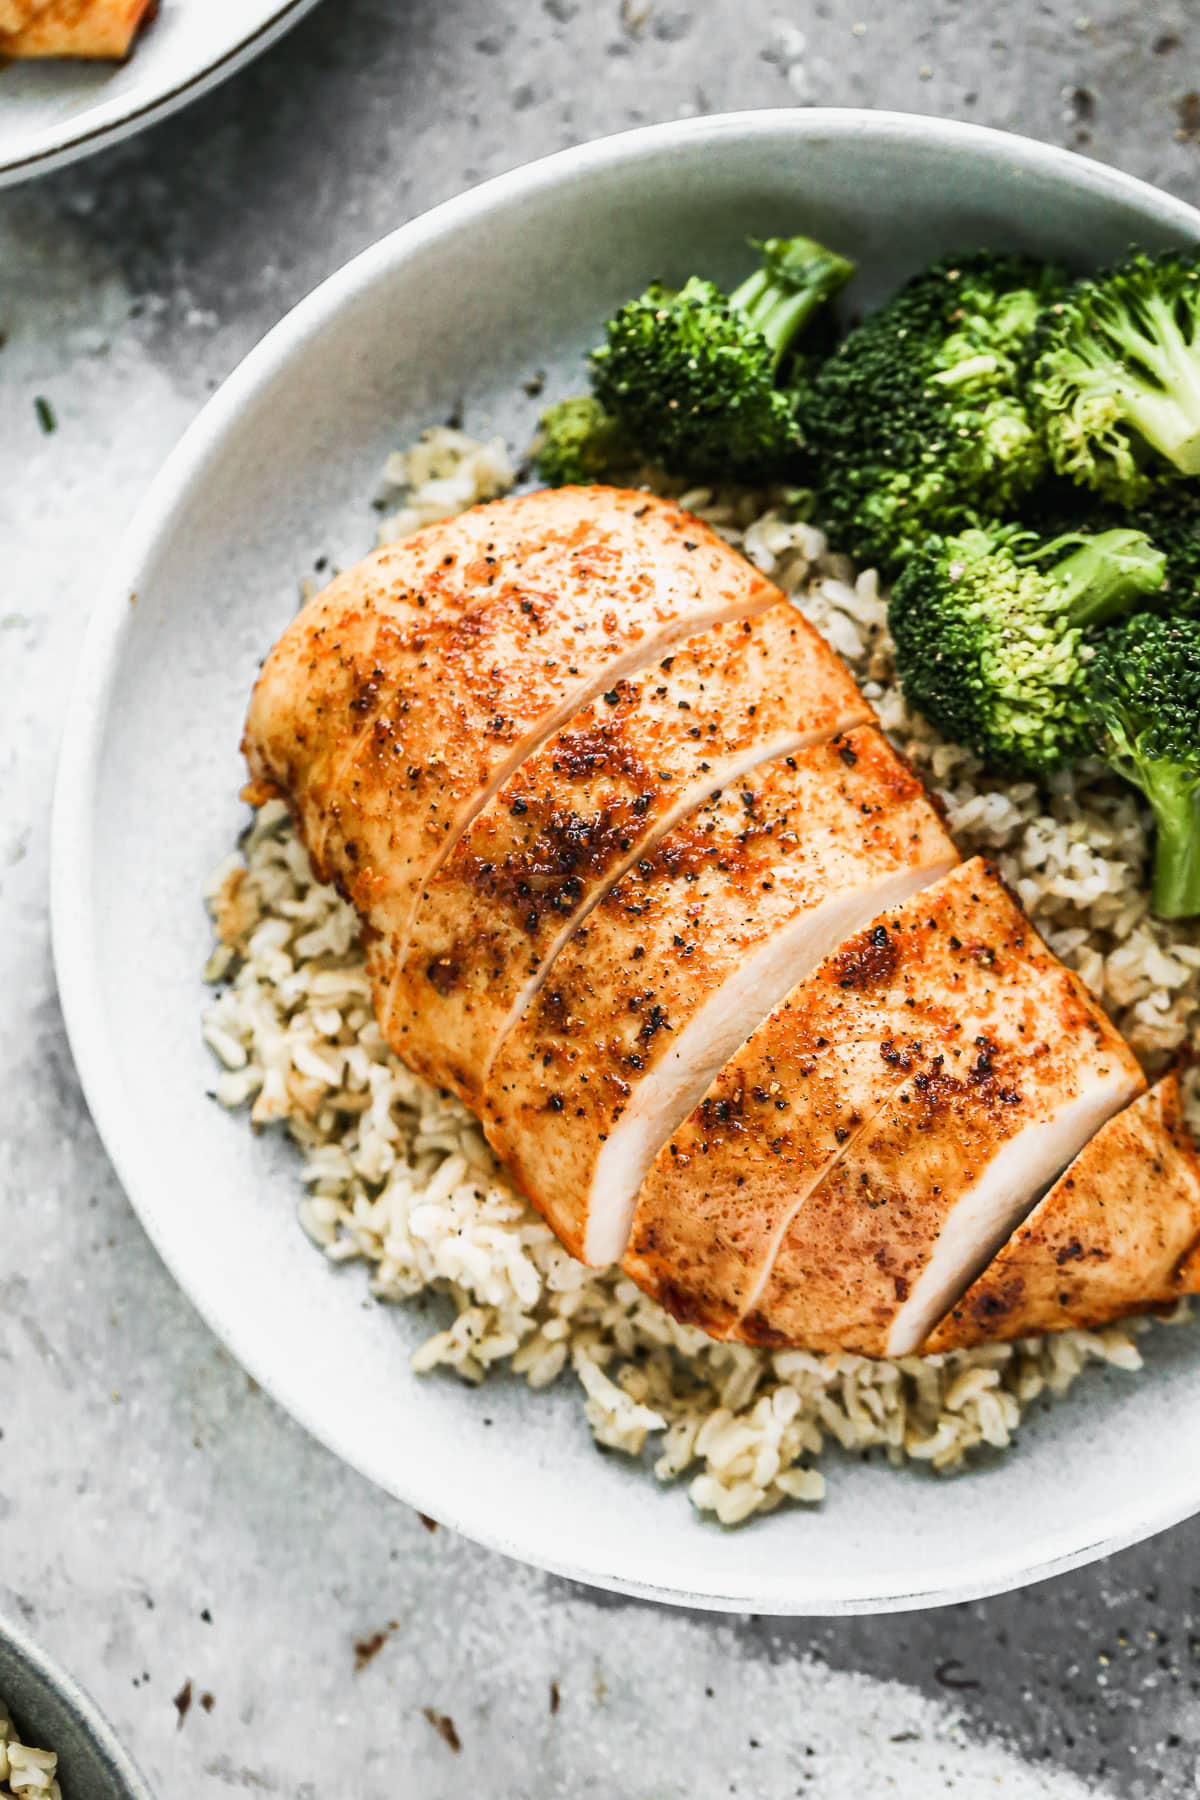 A chicken breast served on a bowl of rice and broccoli